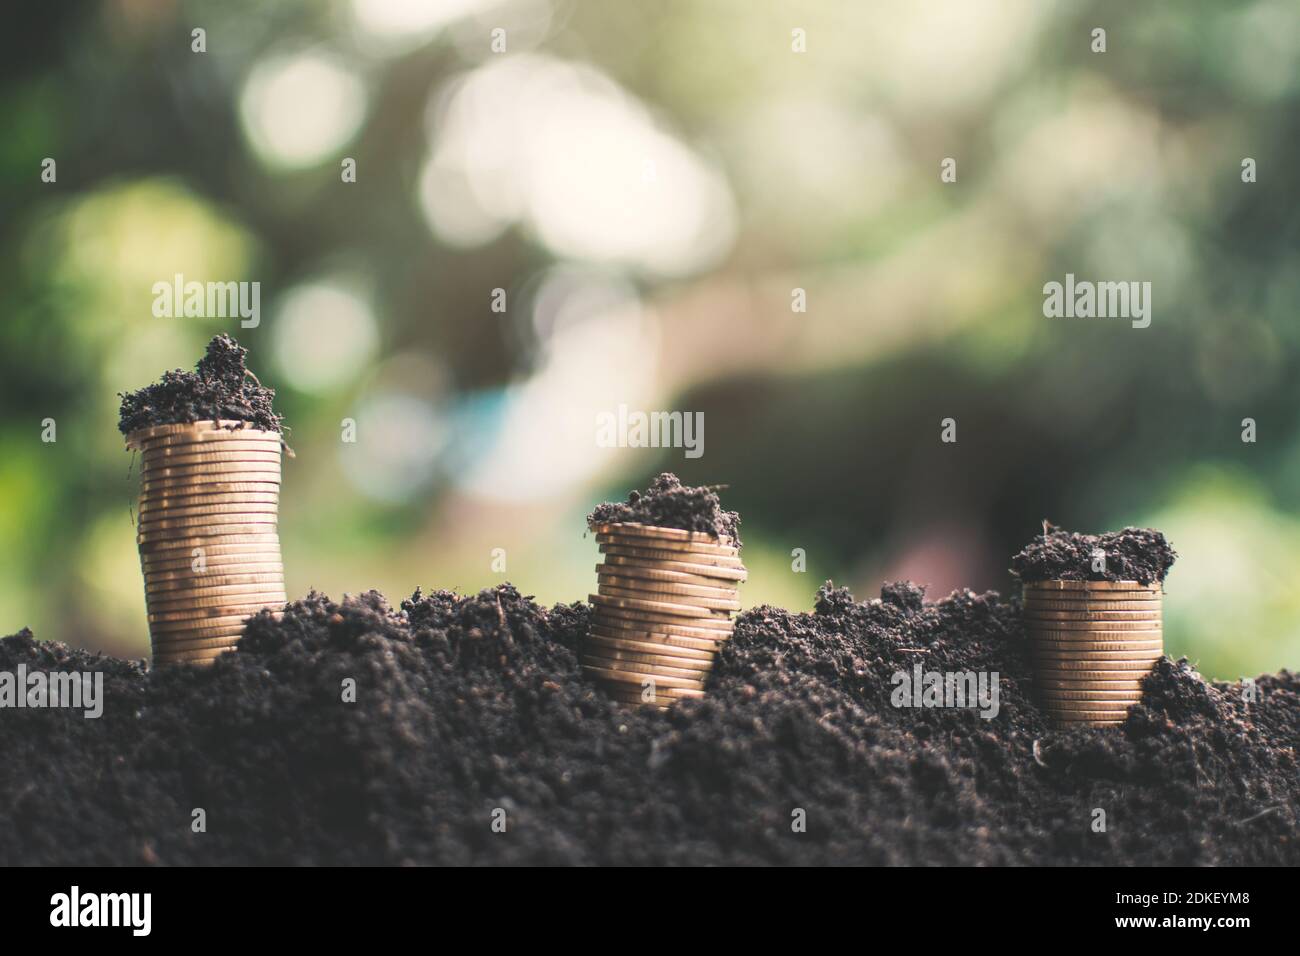 Stack Of Coins In Soil Stock Photo